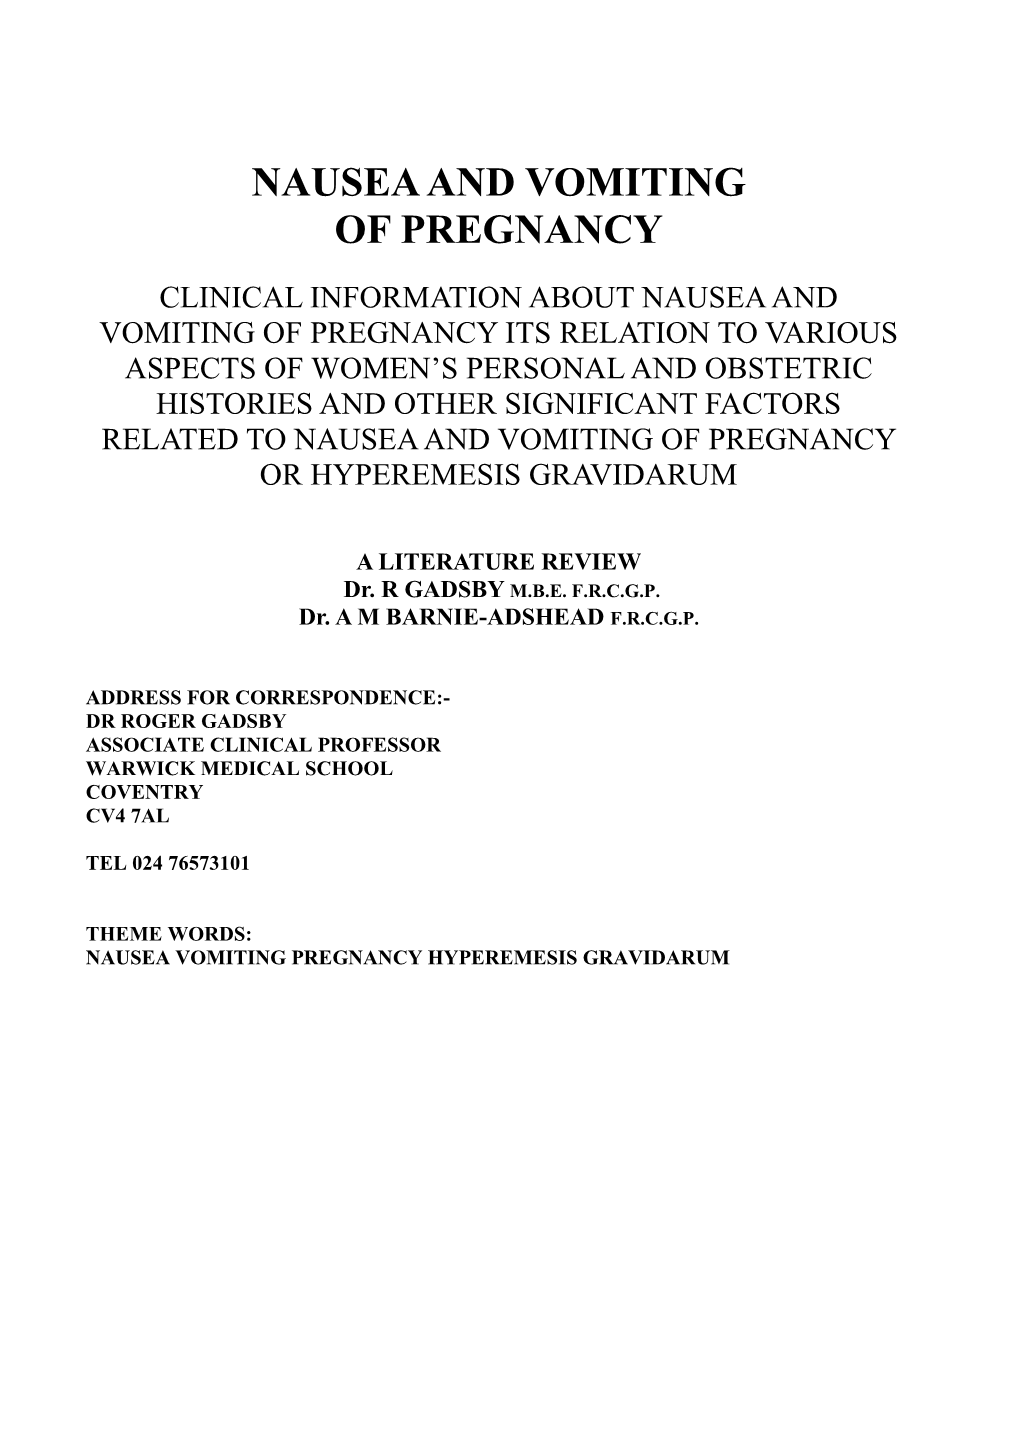 Nausea and Vomiting of Pregnancy